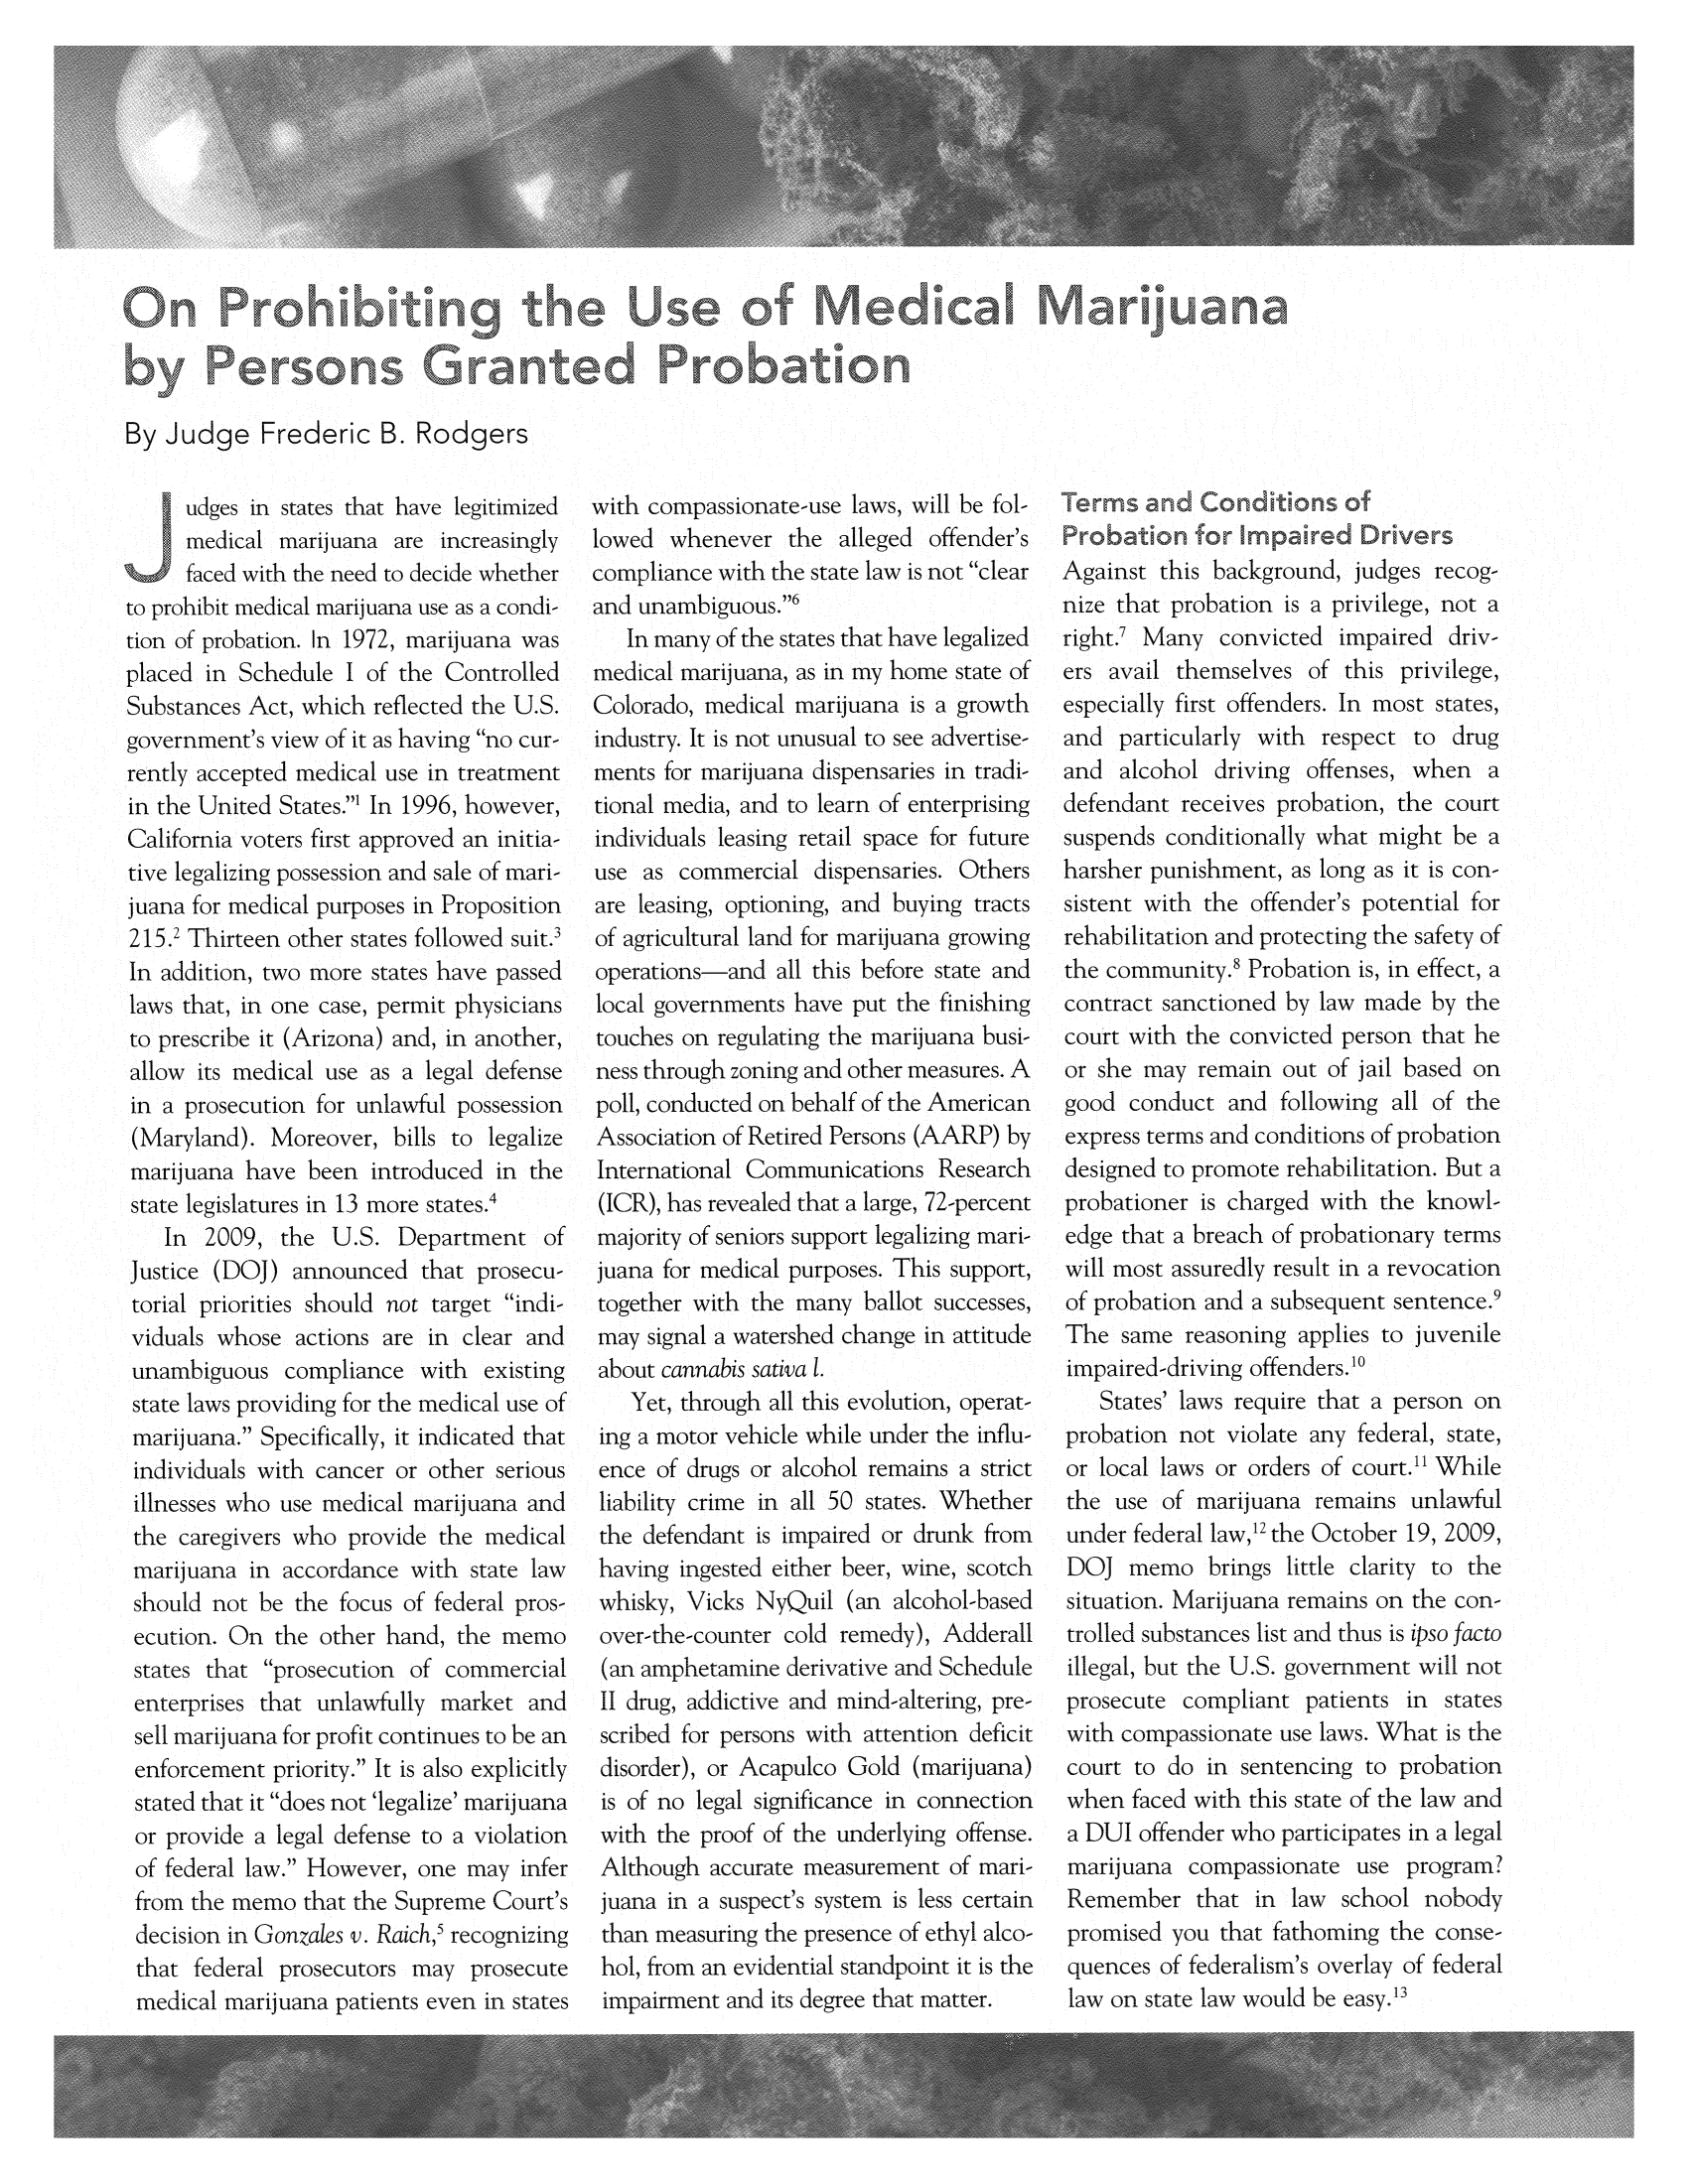 handle is hein.journals/judgej49 and id is 163 raw text is: By Judge Frederic B. Rodgers

udges in states that have legitimized
mredtical marijuana are increasingly
faced with the need to decide whether
to prohibit medical marijuiana use as a condi-
tion of probation. In 1972, marijuiana was
placed in Schedule I of the Controlled
Suibstances Act, which reflected the U.S.
government's view of it as having no cur-
rently accepted medical use in treatment
in the United States.1 In 1996, however,
Califomnia voters first approved an initia-
tive legalizing possession and sale of mari-
juana for medical purposes in Proposition
215.2 Thirteen other staites followed suit.'
In addition, two more states have passed
laws that, in one case, permit physicians
to prescribe it (Arizona) and, in another,
allow its medical use as a legal defense
in a prosecution for unlawful possession
(Maryland). Moreover, b-ills to legalize
marijuana have been introduced in the
state legislatures in 13 more states.4
In 2009, the U.S. Department of
Justice (DOJ) announced that prosecu-
tonial priorities should not target indi-
viduals whose actions are in clear and
unambiguous compliance with existing
state laws providing for the medical use of
marijuana. Specifically, it indicated that
individuals with cancer or other serious
illnesses who use medical marijuana and
the caregivers who provide the miedical
mariju-iana in accordance with state law
should not be the focus of federal pros-
ecution. On the other hand, the Memo
statesc that prosecuition of commercial
enterprisesi that uinlawfuilly market and
sell marijuana for profit continues to be an
enforcement priority. It is also explicitly
stated that it does not 'legalize' marijuana
or provide a legal defense to a violation
of federal law. However, one may, infer
from the memo that the Suipreme Court's
decision in Goazates tv. Raich, recognizing

with compassionate-use lawxs, will be fol-
lowed whenever the alleged offender's
compliance with the state law is not clear
and unambiguous.16
In many of the states that have legalized
medical marijuana, as in my home state of
Colorado, medical marijuana is a growth
industry. It is not unusual to see advertise-
ments for marijuana dispensaries in tradi-
tional media, and to learn of enterprising
individuals leasing retail space for future
use as commercial dispensaries. Others
are leasing, optioning, and buying tracts
of agricultural land for marijuana growing
operations-and all this before state and
local governments have put the finishing
touches on regulating the marijuana busi-
ness through zoning and other measures. A
Poll, conducted on behalf of the American
Association of Retired Persons (AARP) by
International Communications Research
(ICR), has revealed that a large, 72-percent
majority of seniors support legalizing mari-
juana for medical purposes. This support,
together with the many ballot successes,
may signal a watershed change in attitude
about cannabis sativa 1.
Yet, through all this evolution, operat-
ing a motor vehicle w hile under the influ-
ence of drugys or alcohol remains a strict
liability crime in all 50 states. Whether
the defendant is impaired or drunk from
having ingested either beer, wine, scotch
whisky, Vicks NyQuil (an alcohol-based
over-the-counter cold remedy), Adderall
(ain amphetamine derivative and Schedule
II drug, addictive and mnind altering, pre-
scribed for persons wilth attention deficit
disorder), or Acapulco Gold (marijuana)
is of no legal significance in connection
with the proof of the underlying offense.
Although accurate measurement of mani
juana in a suspect's system is less certain
than measuring thie presence of ethyl alco-
hol,~ ~ ~ ~   ~~~4 foaneietastdp in t s th

Against this backg round, judges recog-
nize that probation is a privilege, not a
right.' Many convicted impaired driv-
ers avail themselves of this privilege,
especially first offenders. In most states,
and particularly with respect to drug
and alcohol driving offenses, when a
defendant receives probation, the court
suspends conditionally what might be a
harsher punishment, as long as it is con-
sistent with the offender's potential for
rehabilitation and protecting the safety of
the community.' Probation is, in effect, a
contract sanctioned by law made by the
court with the convicted person that he
or she may remain out of j ail based on
good conduct and following all of the
express terms and conditions of probation
designed to promote rehabilitation. But a
probationer is charged with the knowl-
edge that a breach of probationary terms
will most assuredly result in a revocation
of probation and a subsequent sentence.9
The same reasoning applies to juvenile
impaired-driving offenders.10
States' laws require that a person on
probation not violate any federal, state,
or local laws or orders of court.1 While
the use of marijuana remains unlawful
under federal law,1 the October 19, A2009,
DOJ memo brings little clarity to the
situation. MNarijuana remains on the con-
trolled substan-ces list aind thus is ipso facto
illeglal, but the U.S. govemnment will not
prosecuite compliant patients in states
withi compassionate use laws. What is the
court to do in sentencing to probation
when faced with this state of the lawv and
a DUI offender who participates in a legal
marijuiana comtpassionate use program.
Remember that in law school nobody
promised you that fathoming the conse-


